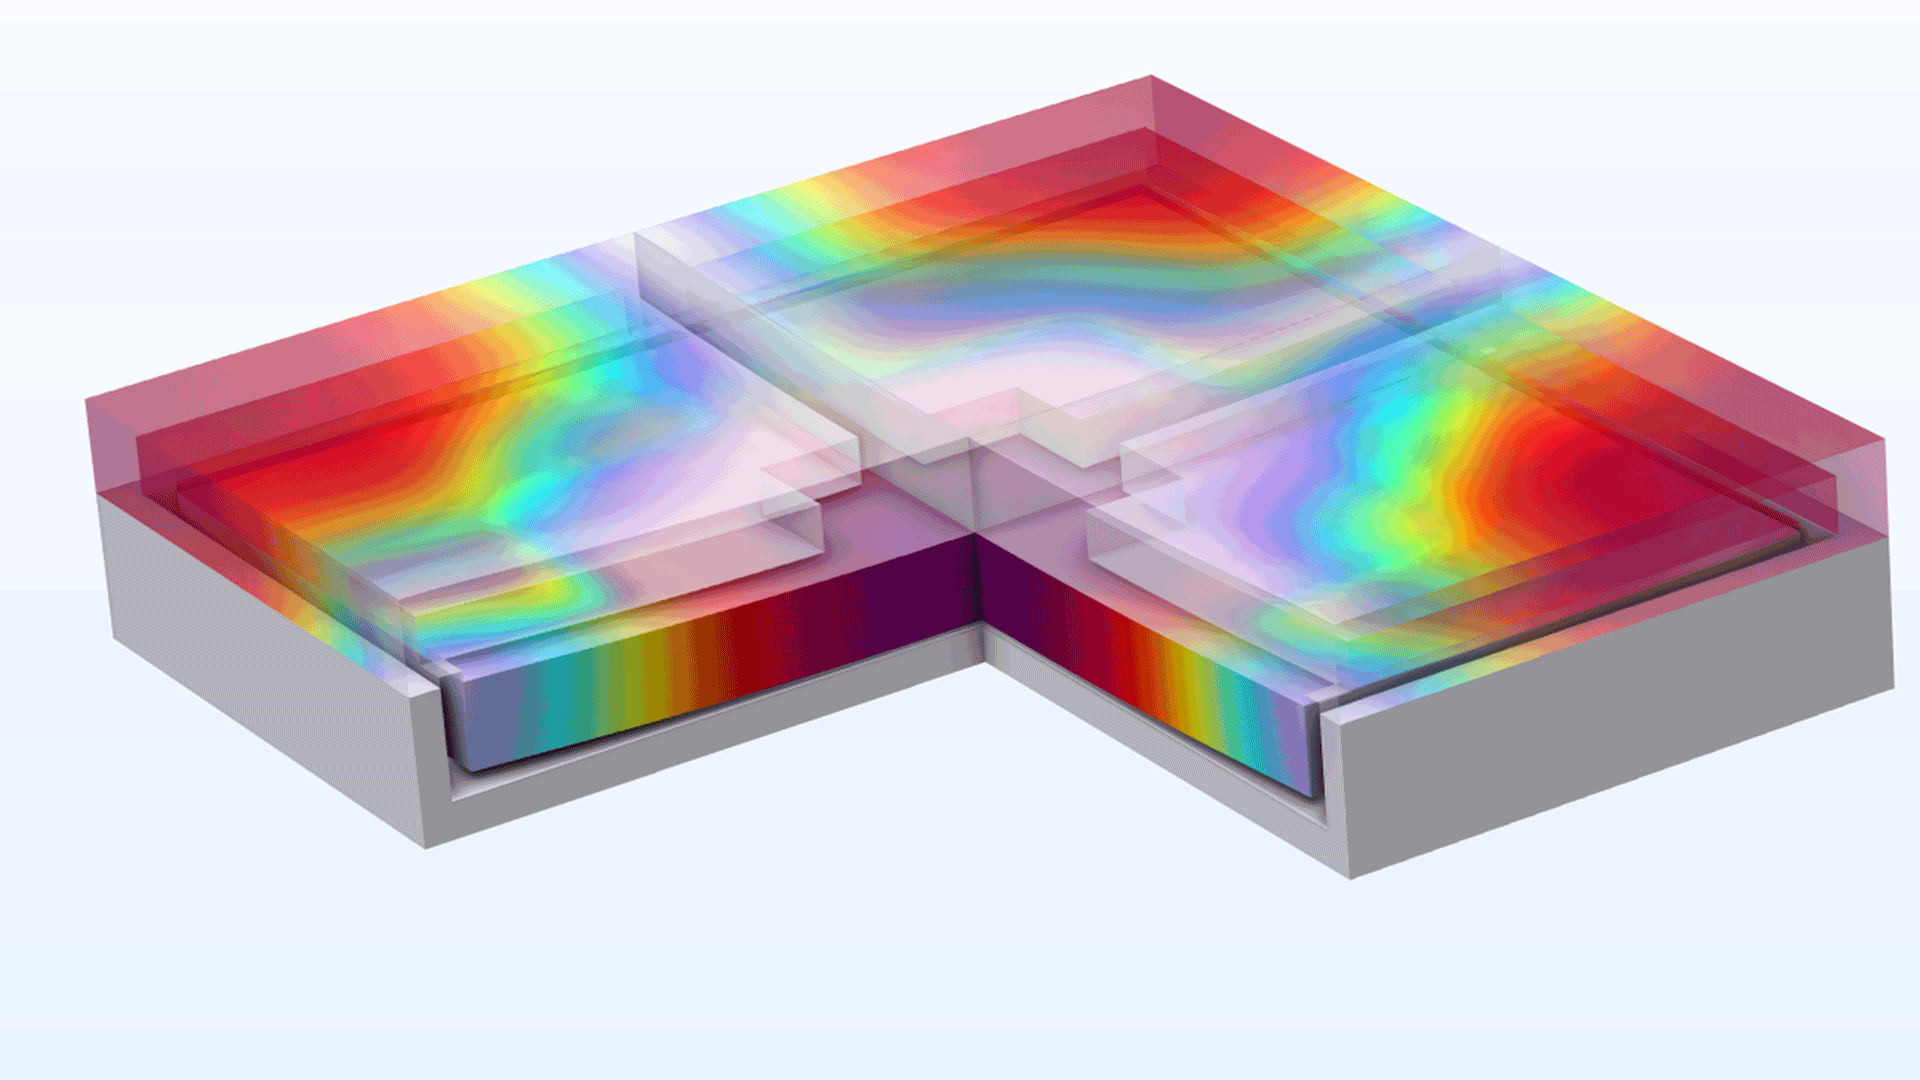 An ultrasonic transducer model showing the deformation in the Prism color table.